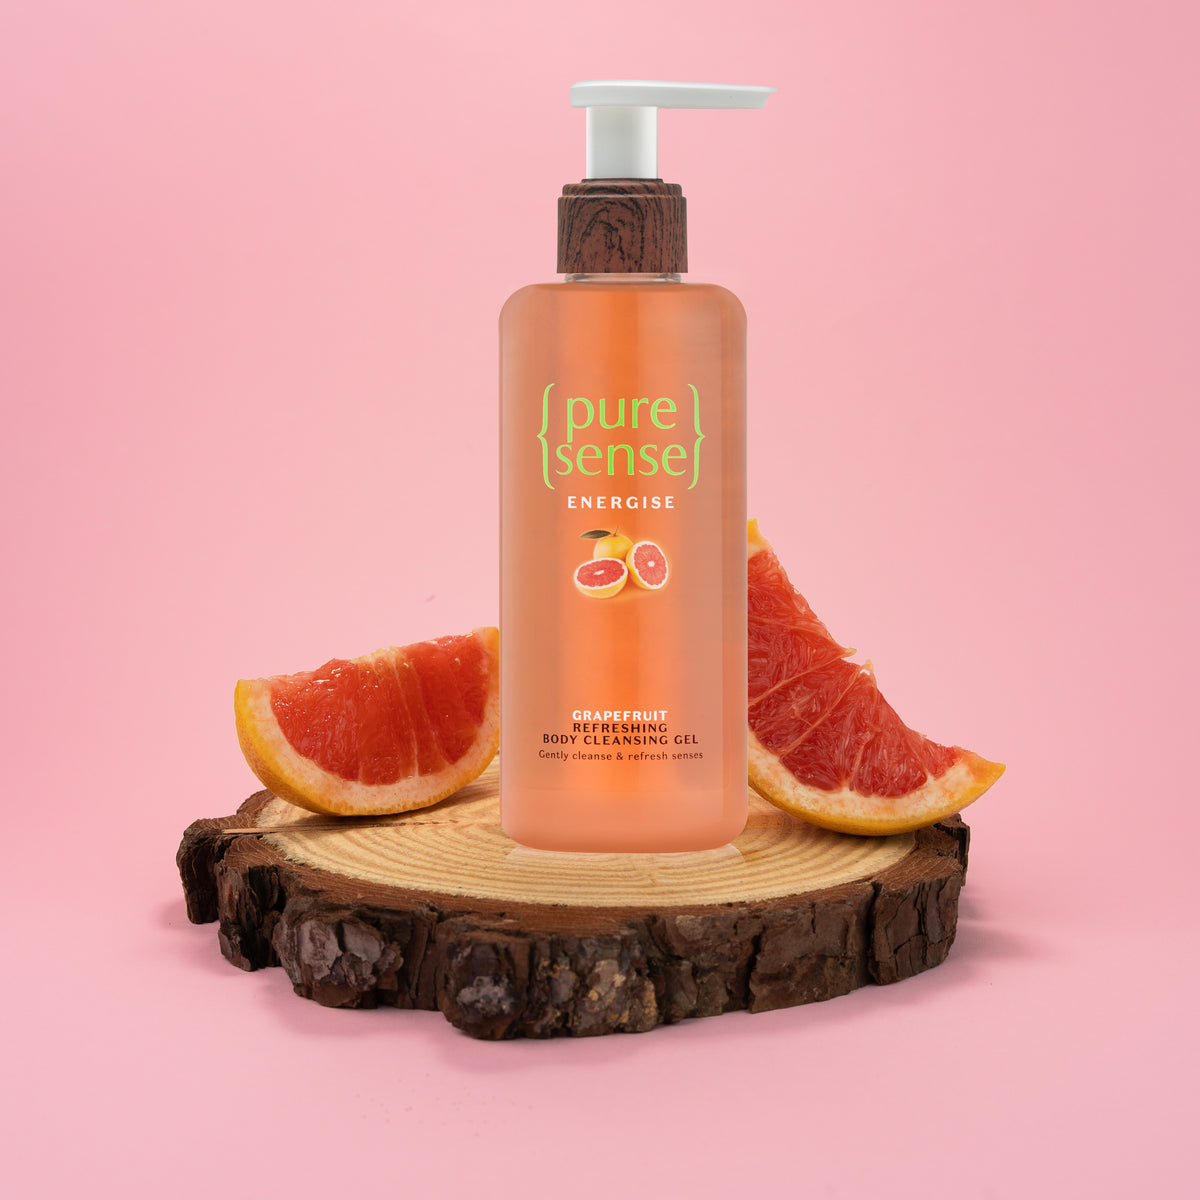 Energise Grapefruit Refreshing Body Cleansing Gel | From the makers of Parachute Advansed | 200ml - PureSense